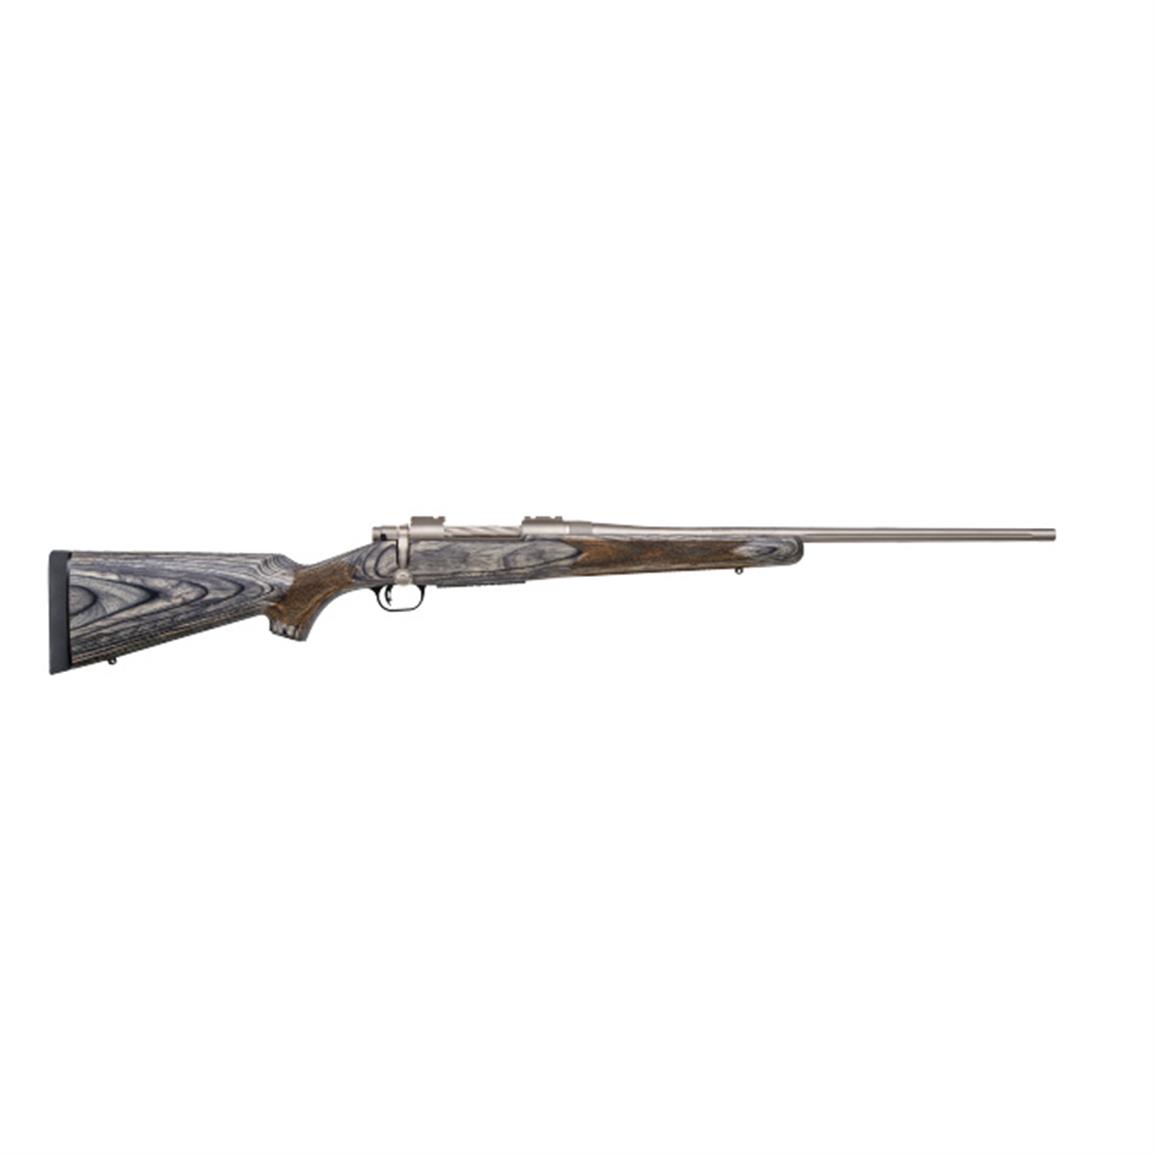 Mossberg Patriot Combo, Bolt Action, .308 Winchester, 22" Barrel, 5+1 Rounds